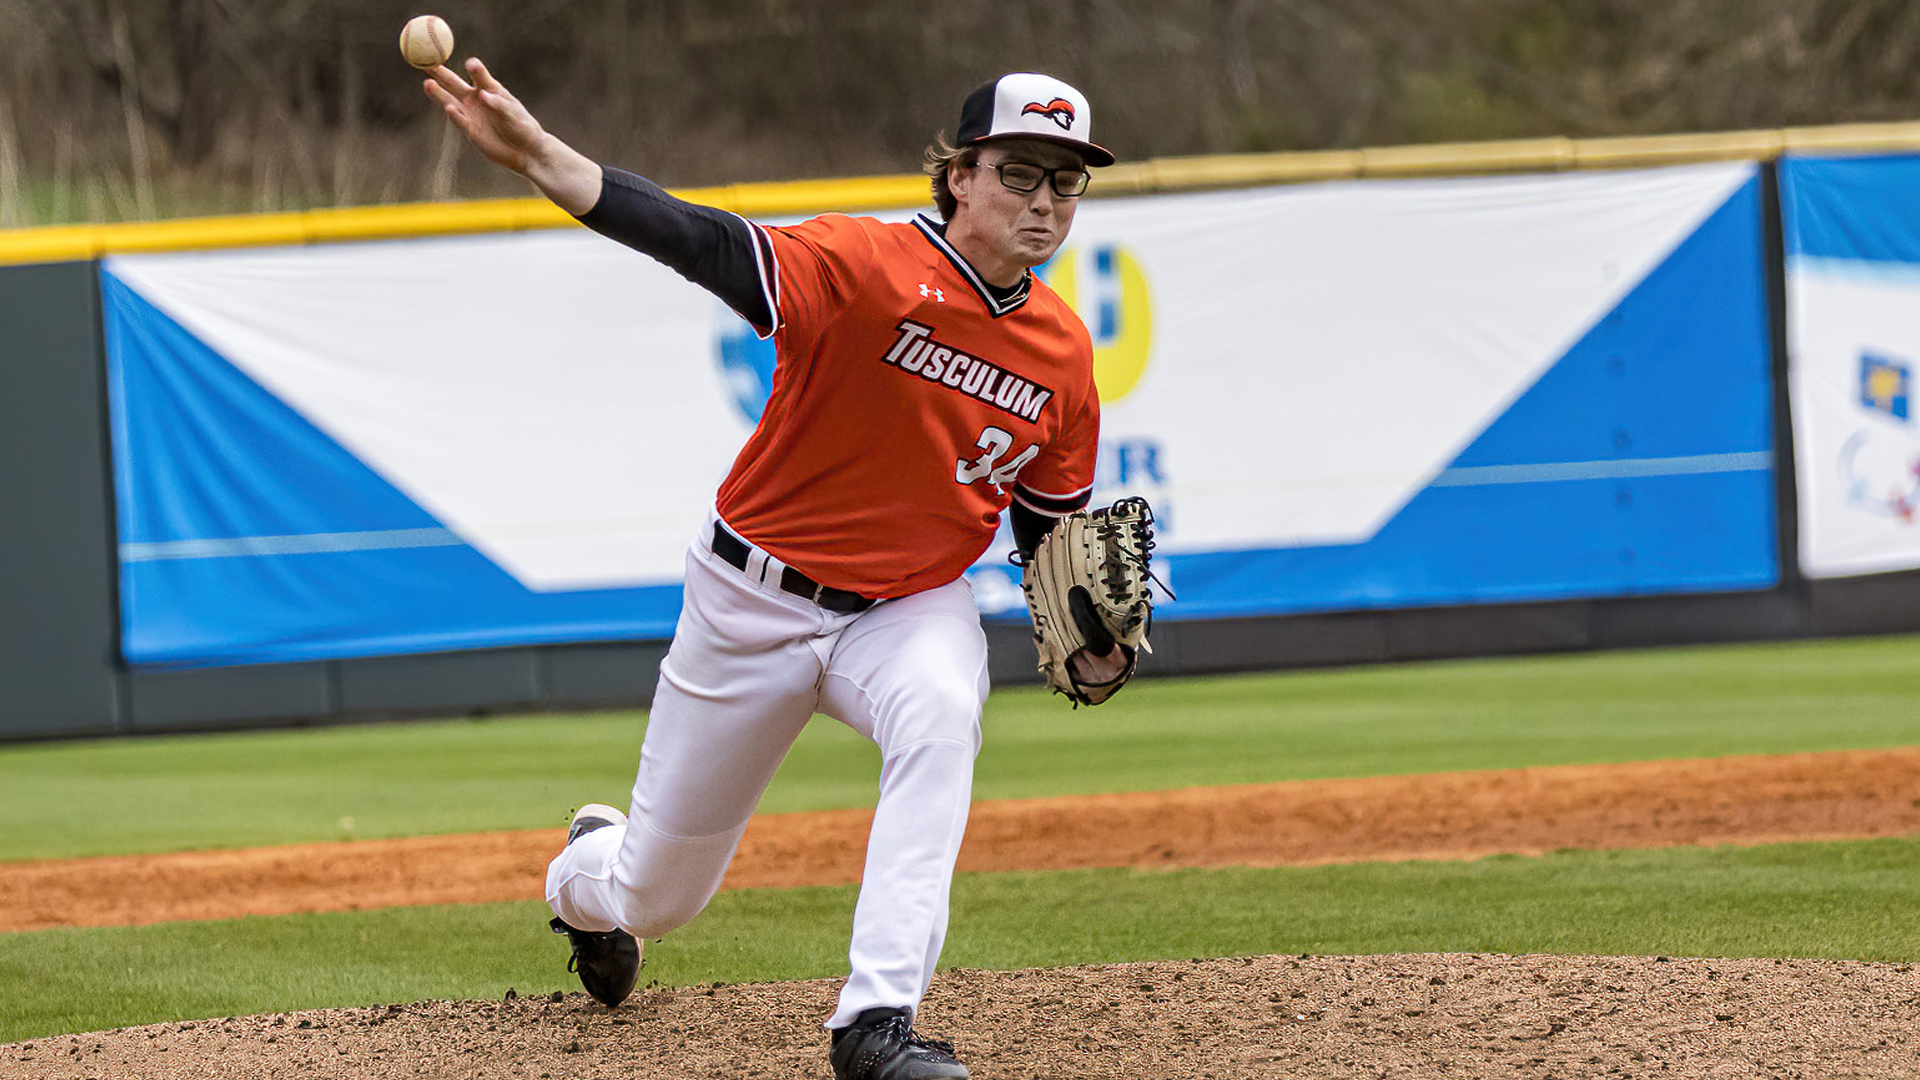 King holds off late Tusculum rally in non-conference baseball